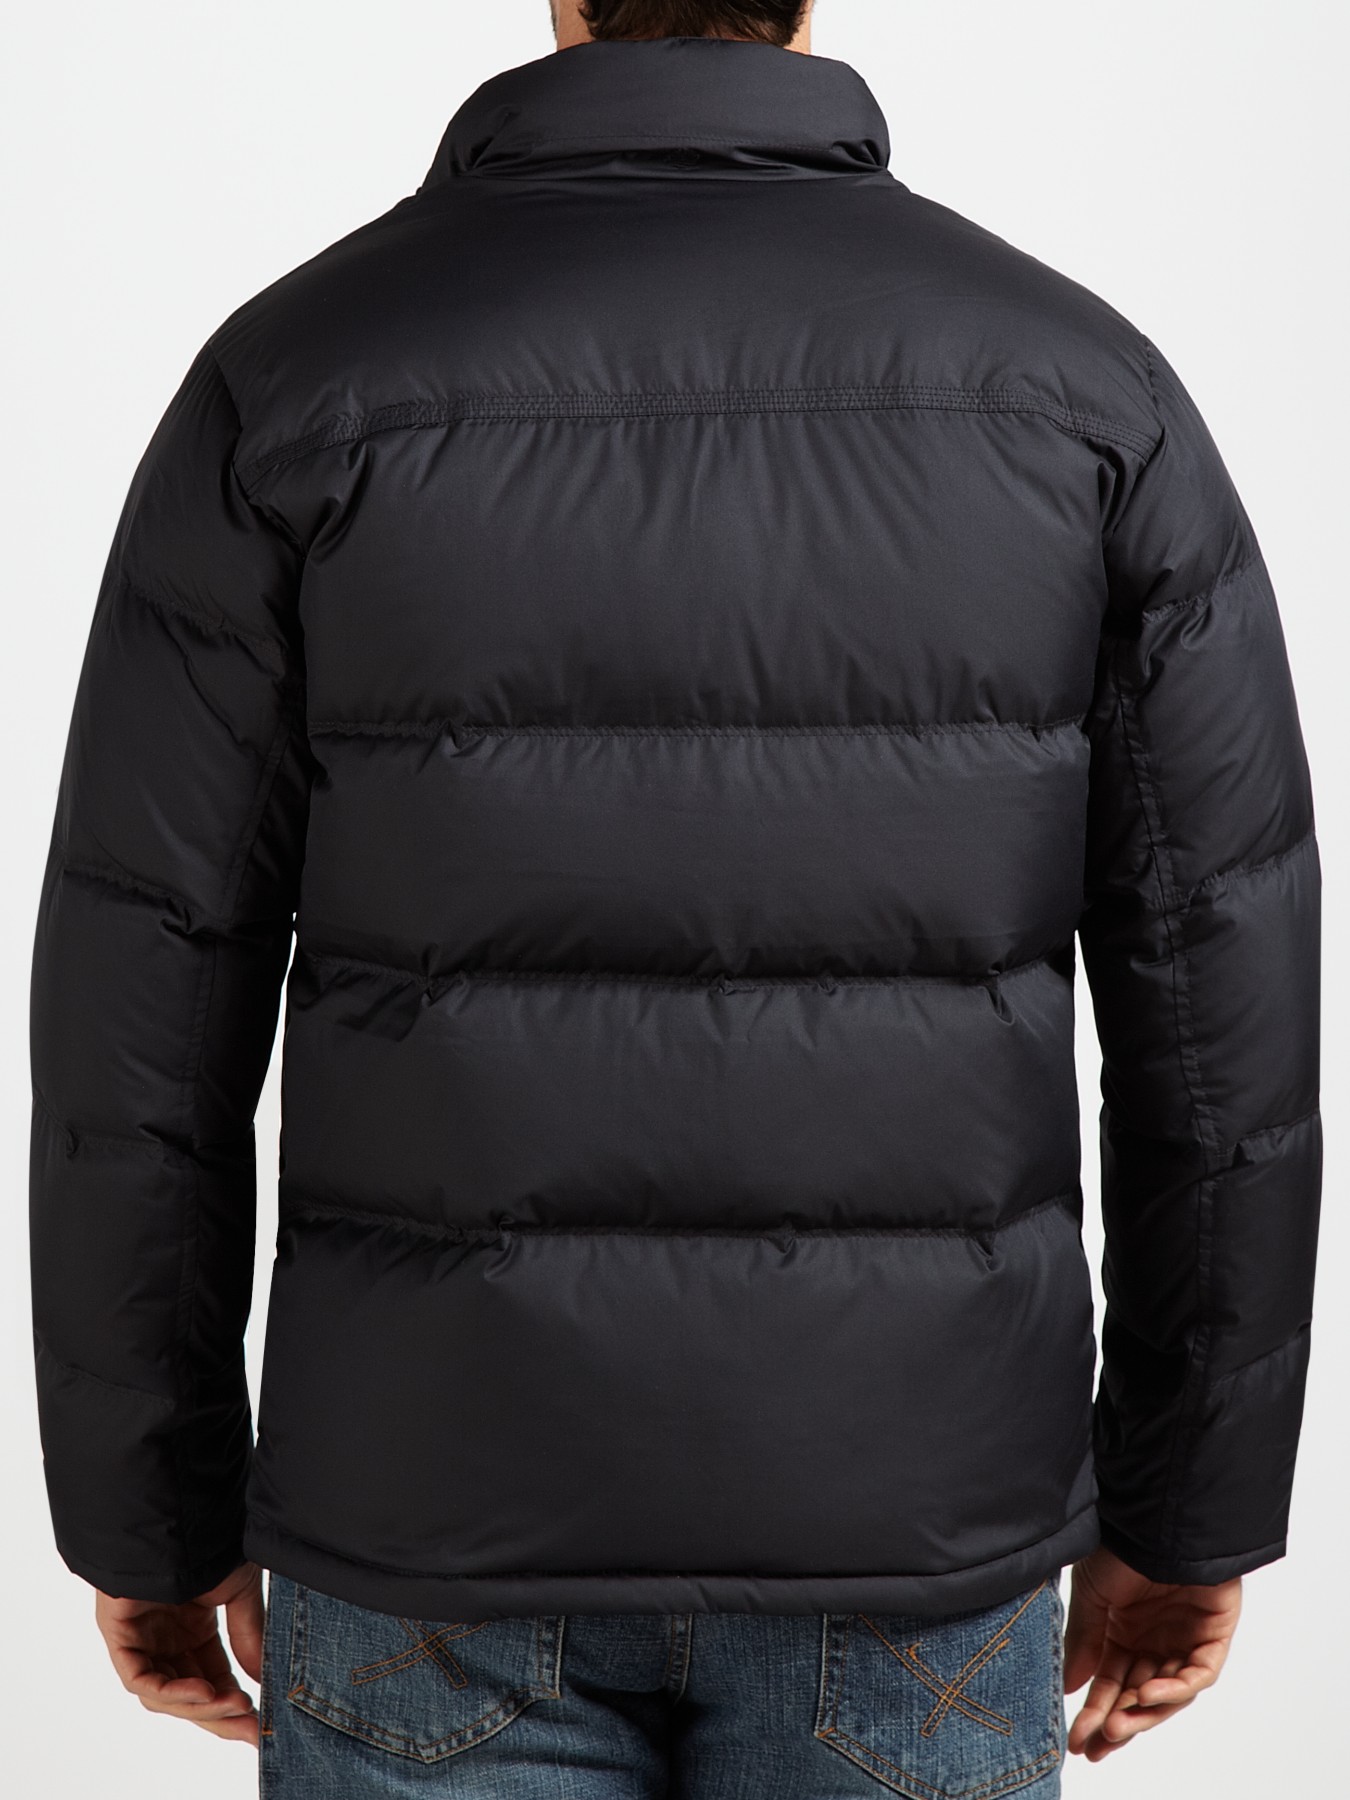 Timberland Synthetic Reedville Down Jacket in Black for Men - Lyst